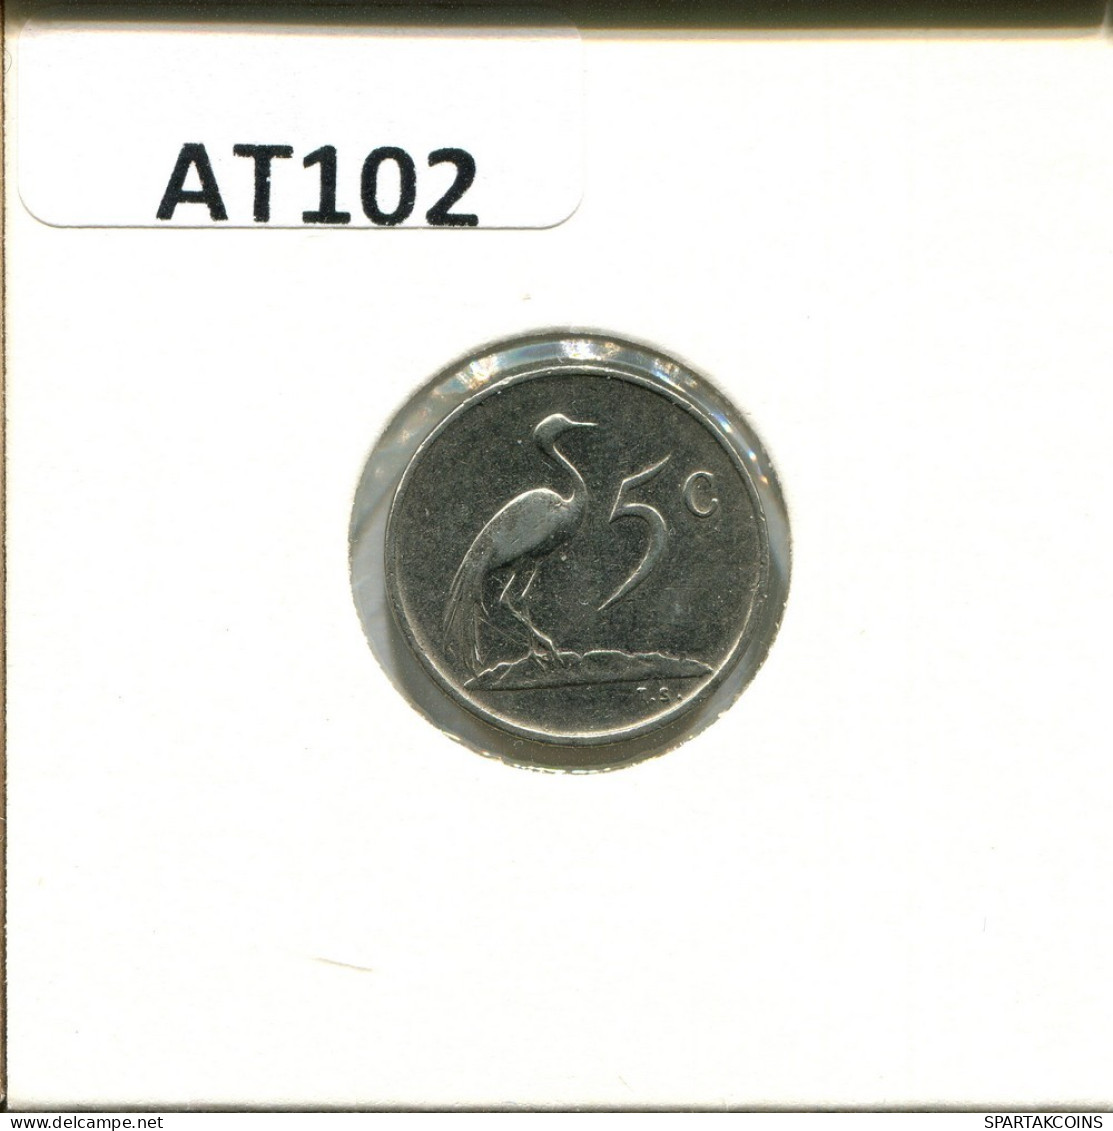 5 CENTS 1974 SUDAFRICA SOUTH AFRICA Moneda #AT102.E.A - South Africa